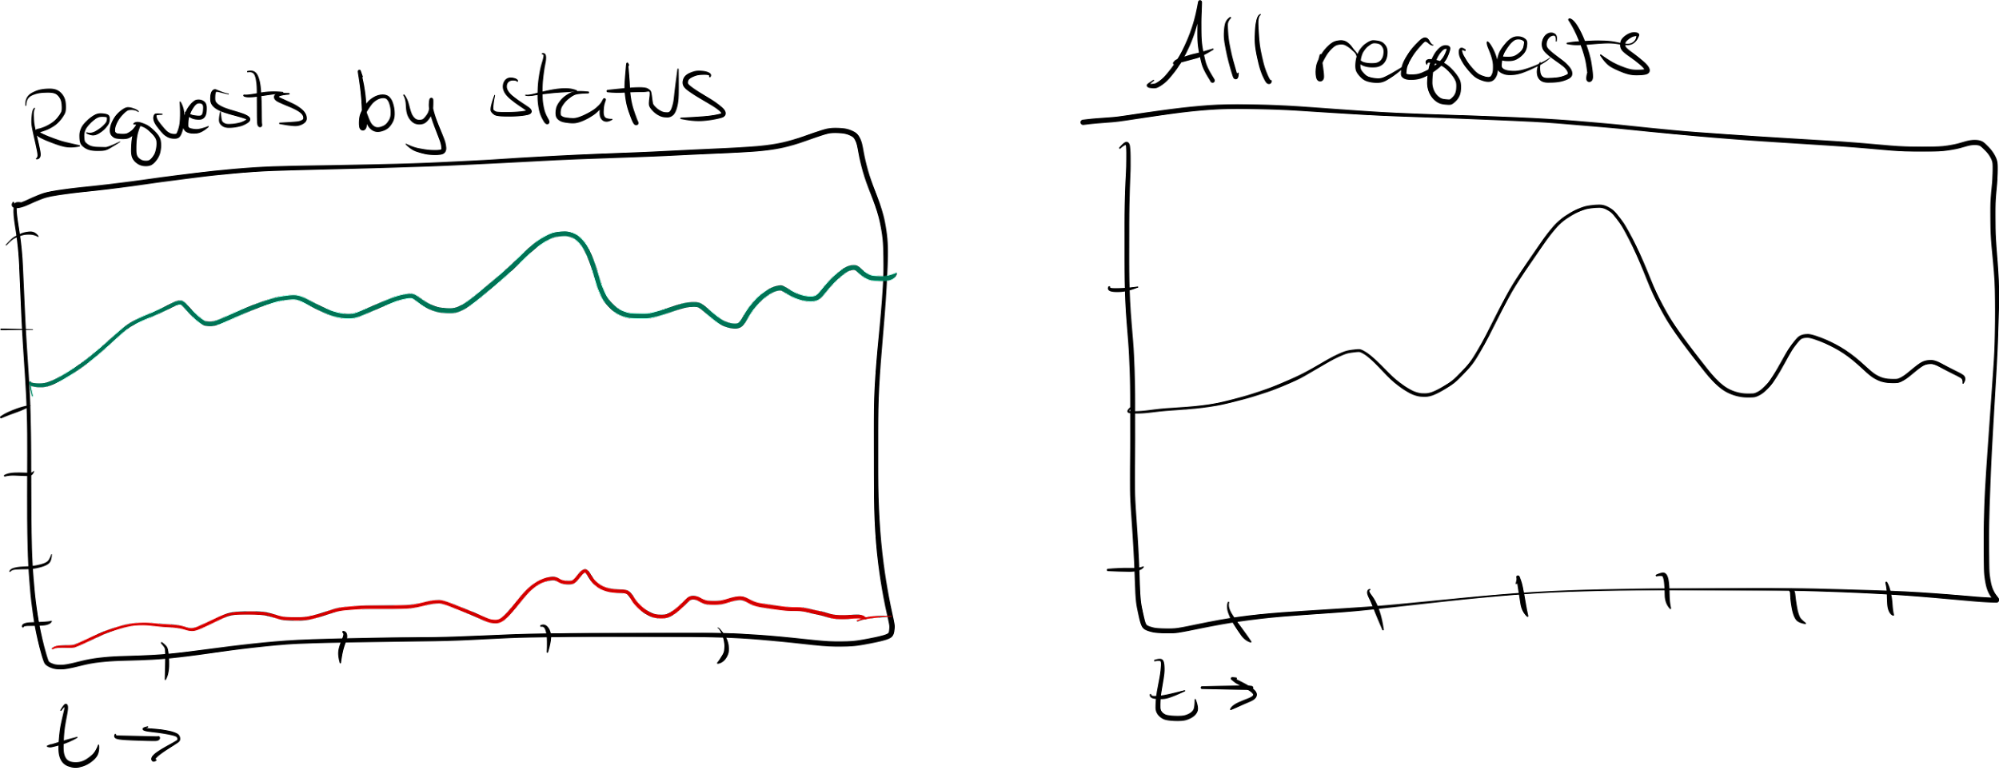 Figure 8 shows graphing the same metrics in different ways, split by status code or summed across them.